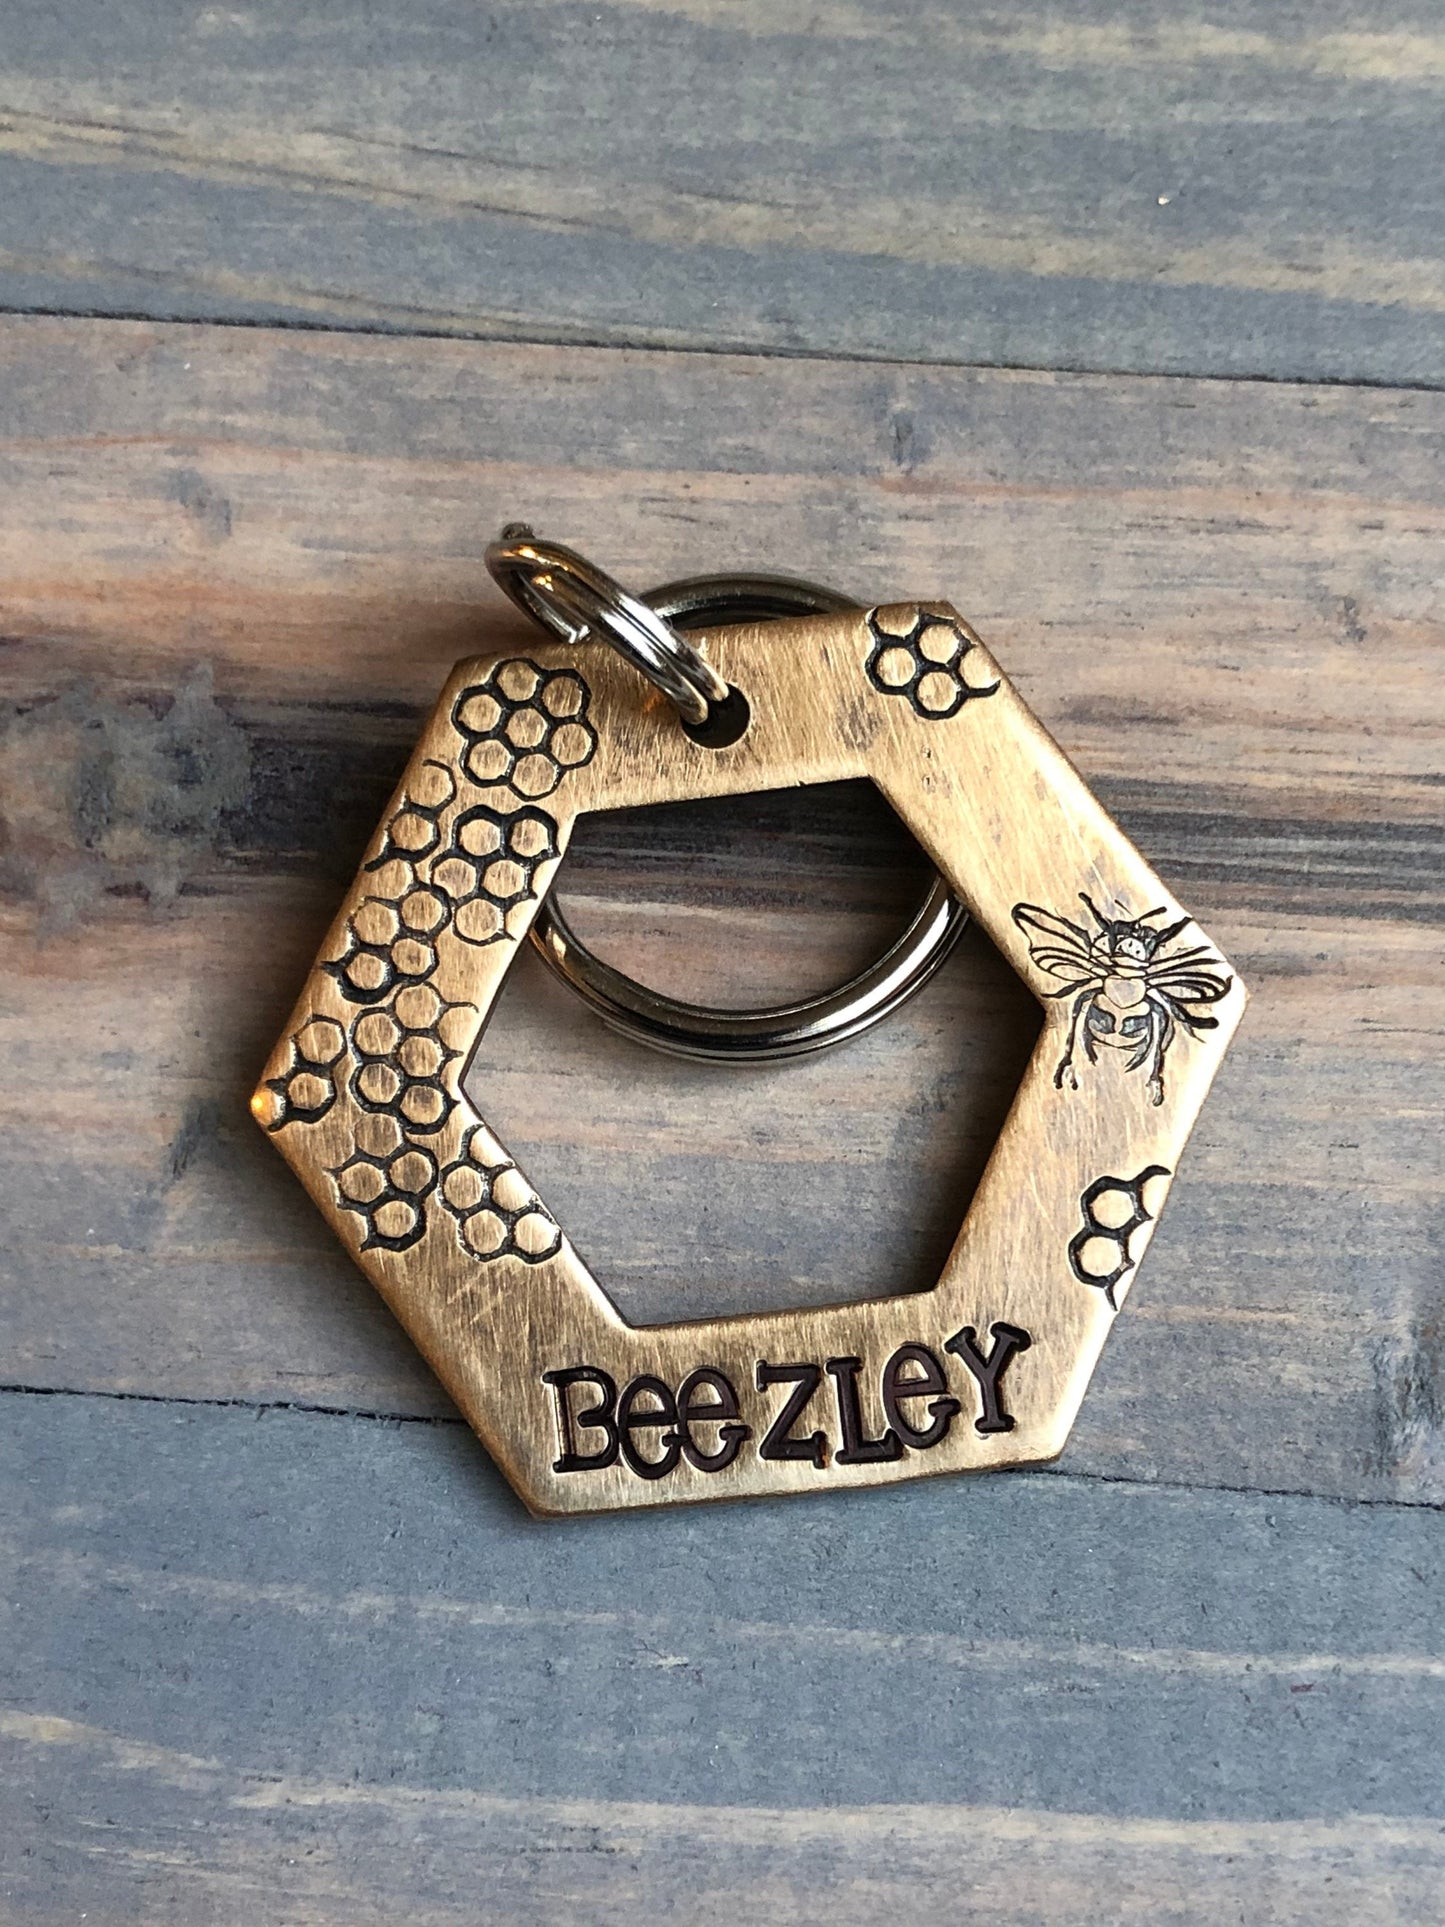 Custom Queen Bee Dog Tag, Hand Stamped washer Pet ID, Personalized Dog Tag for Dog, honey bee, honey comb, bee hive